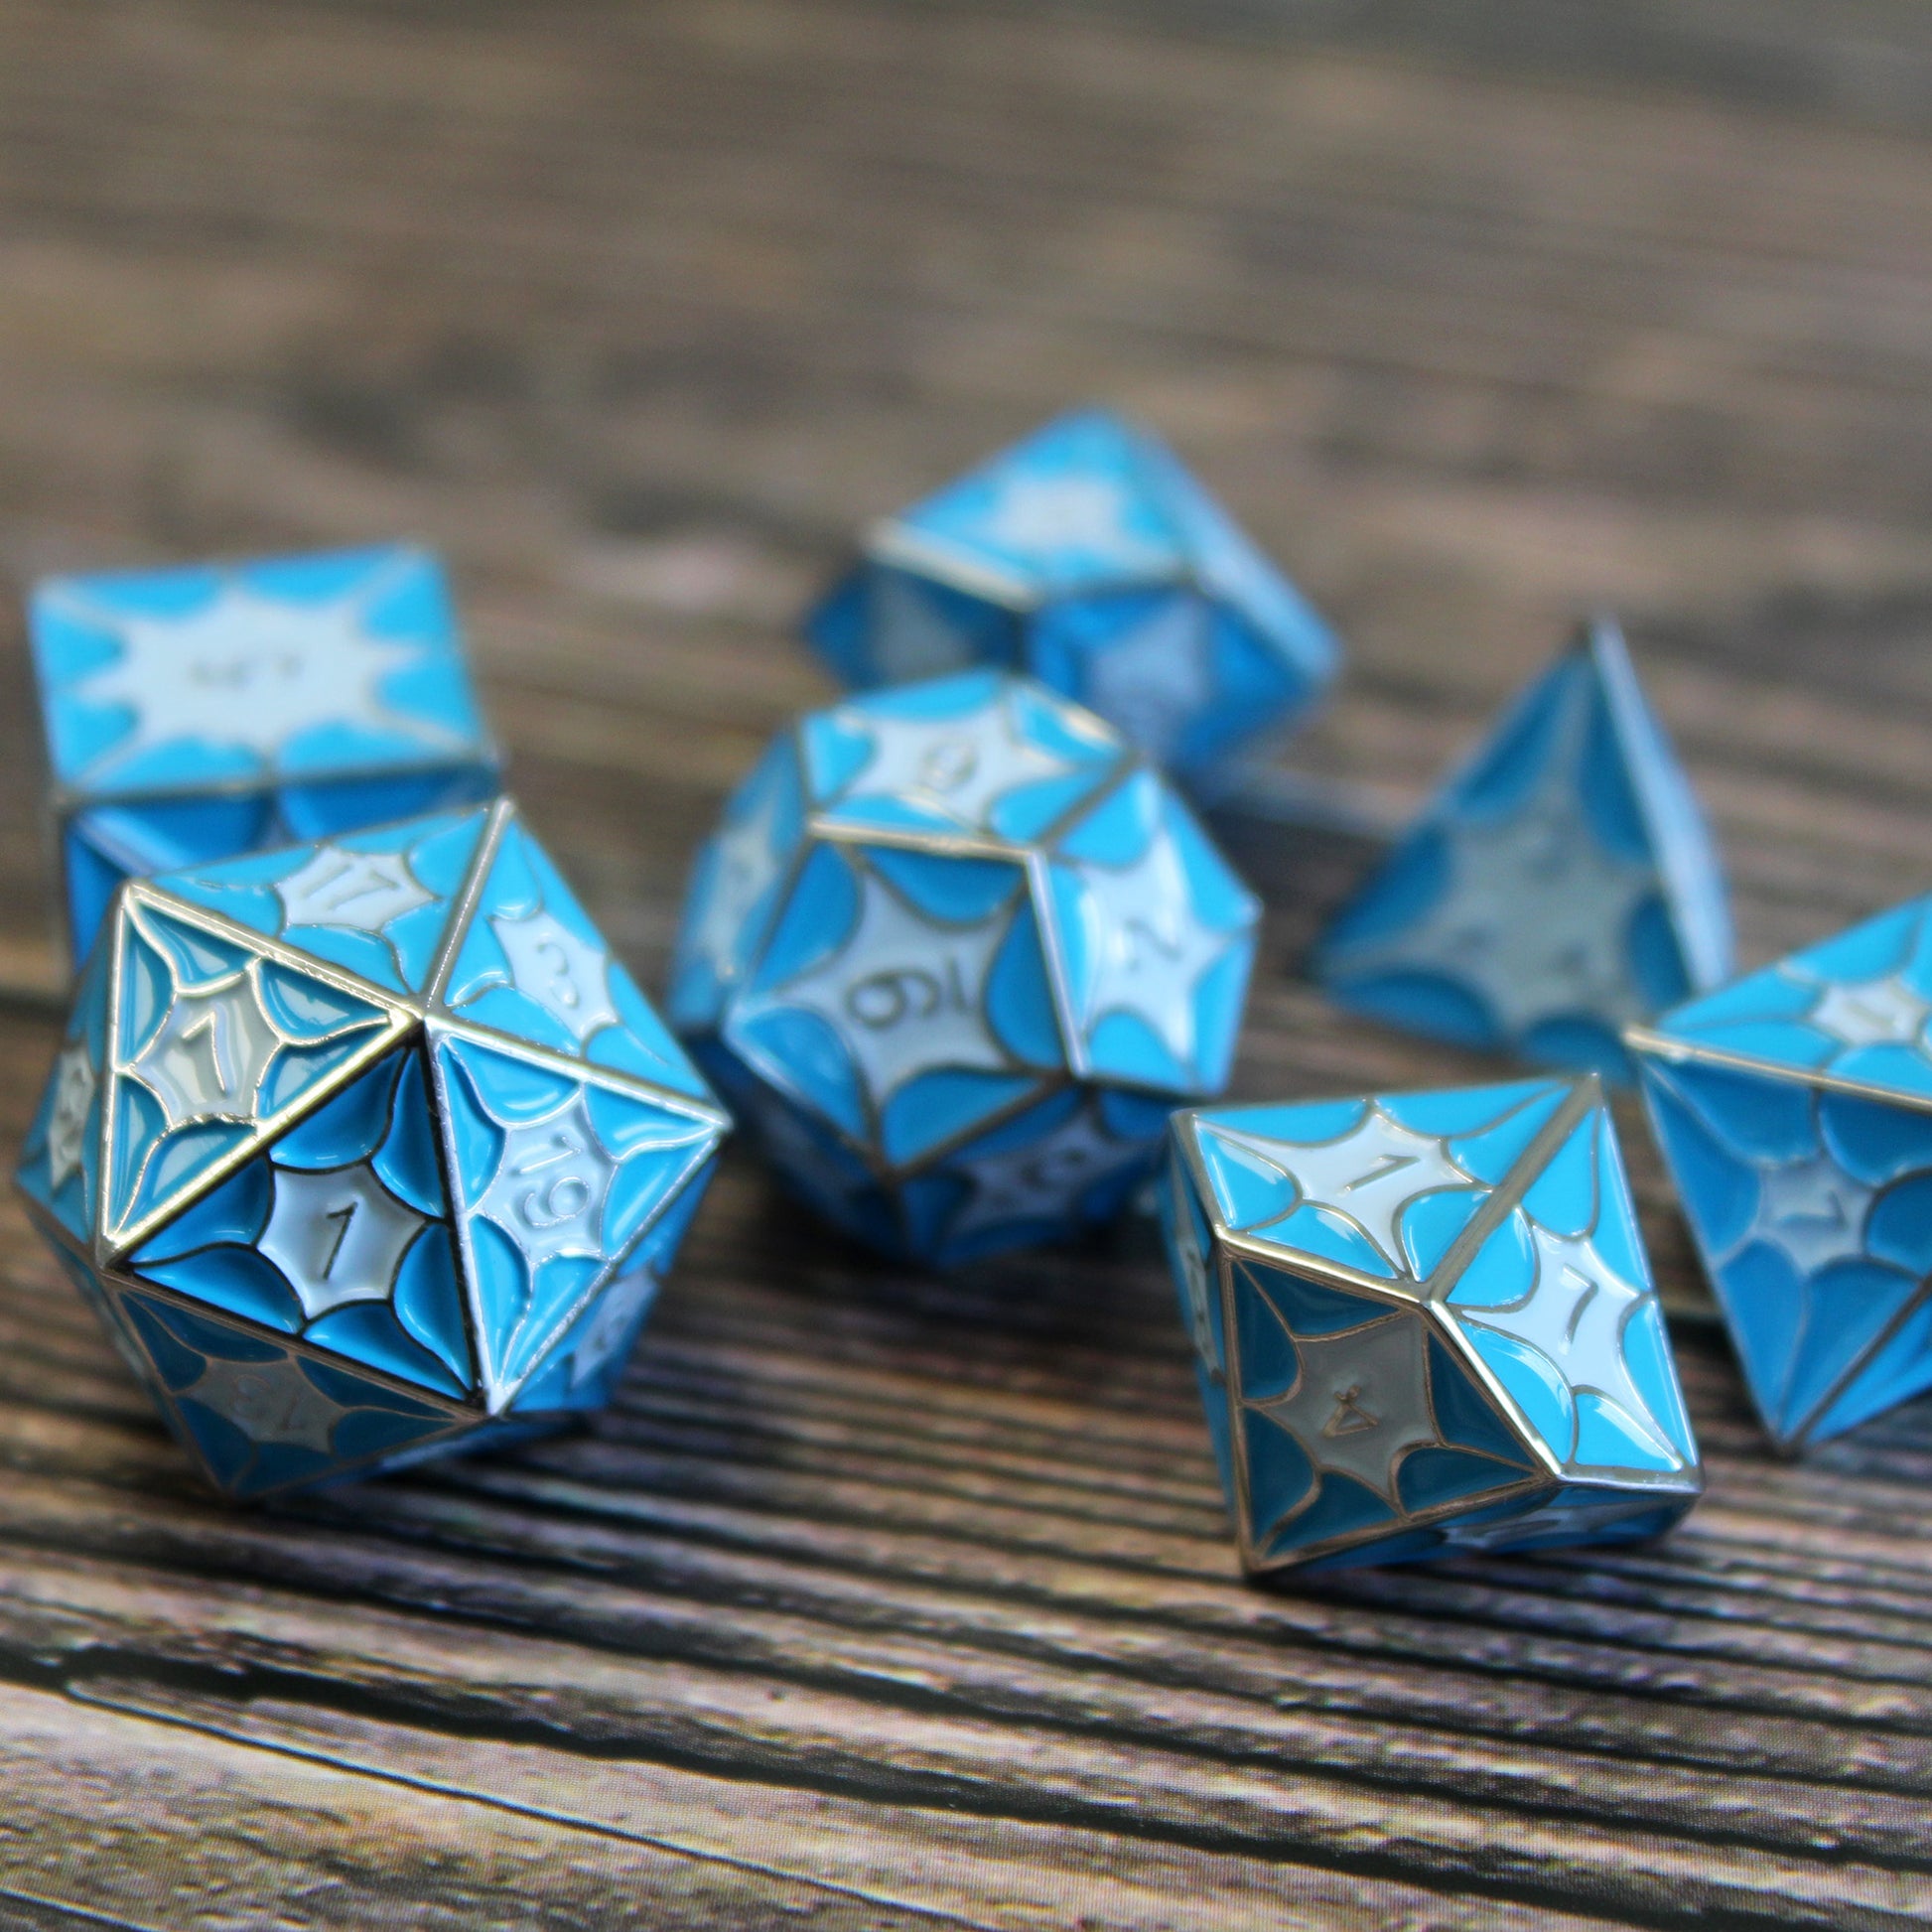 Dice set inspired by blue dragon scales.